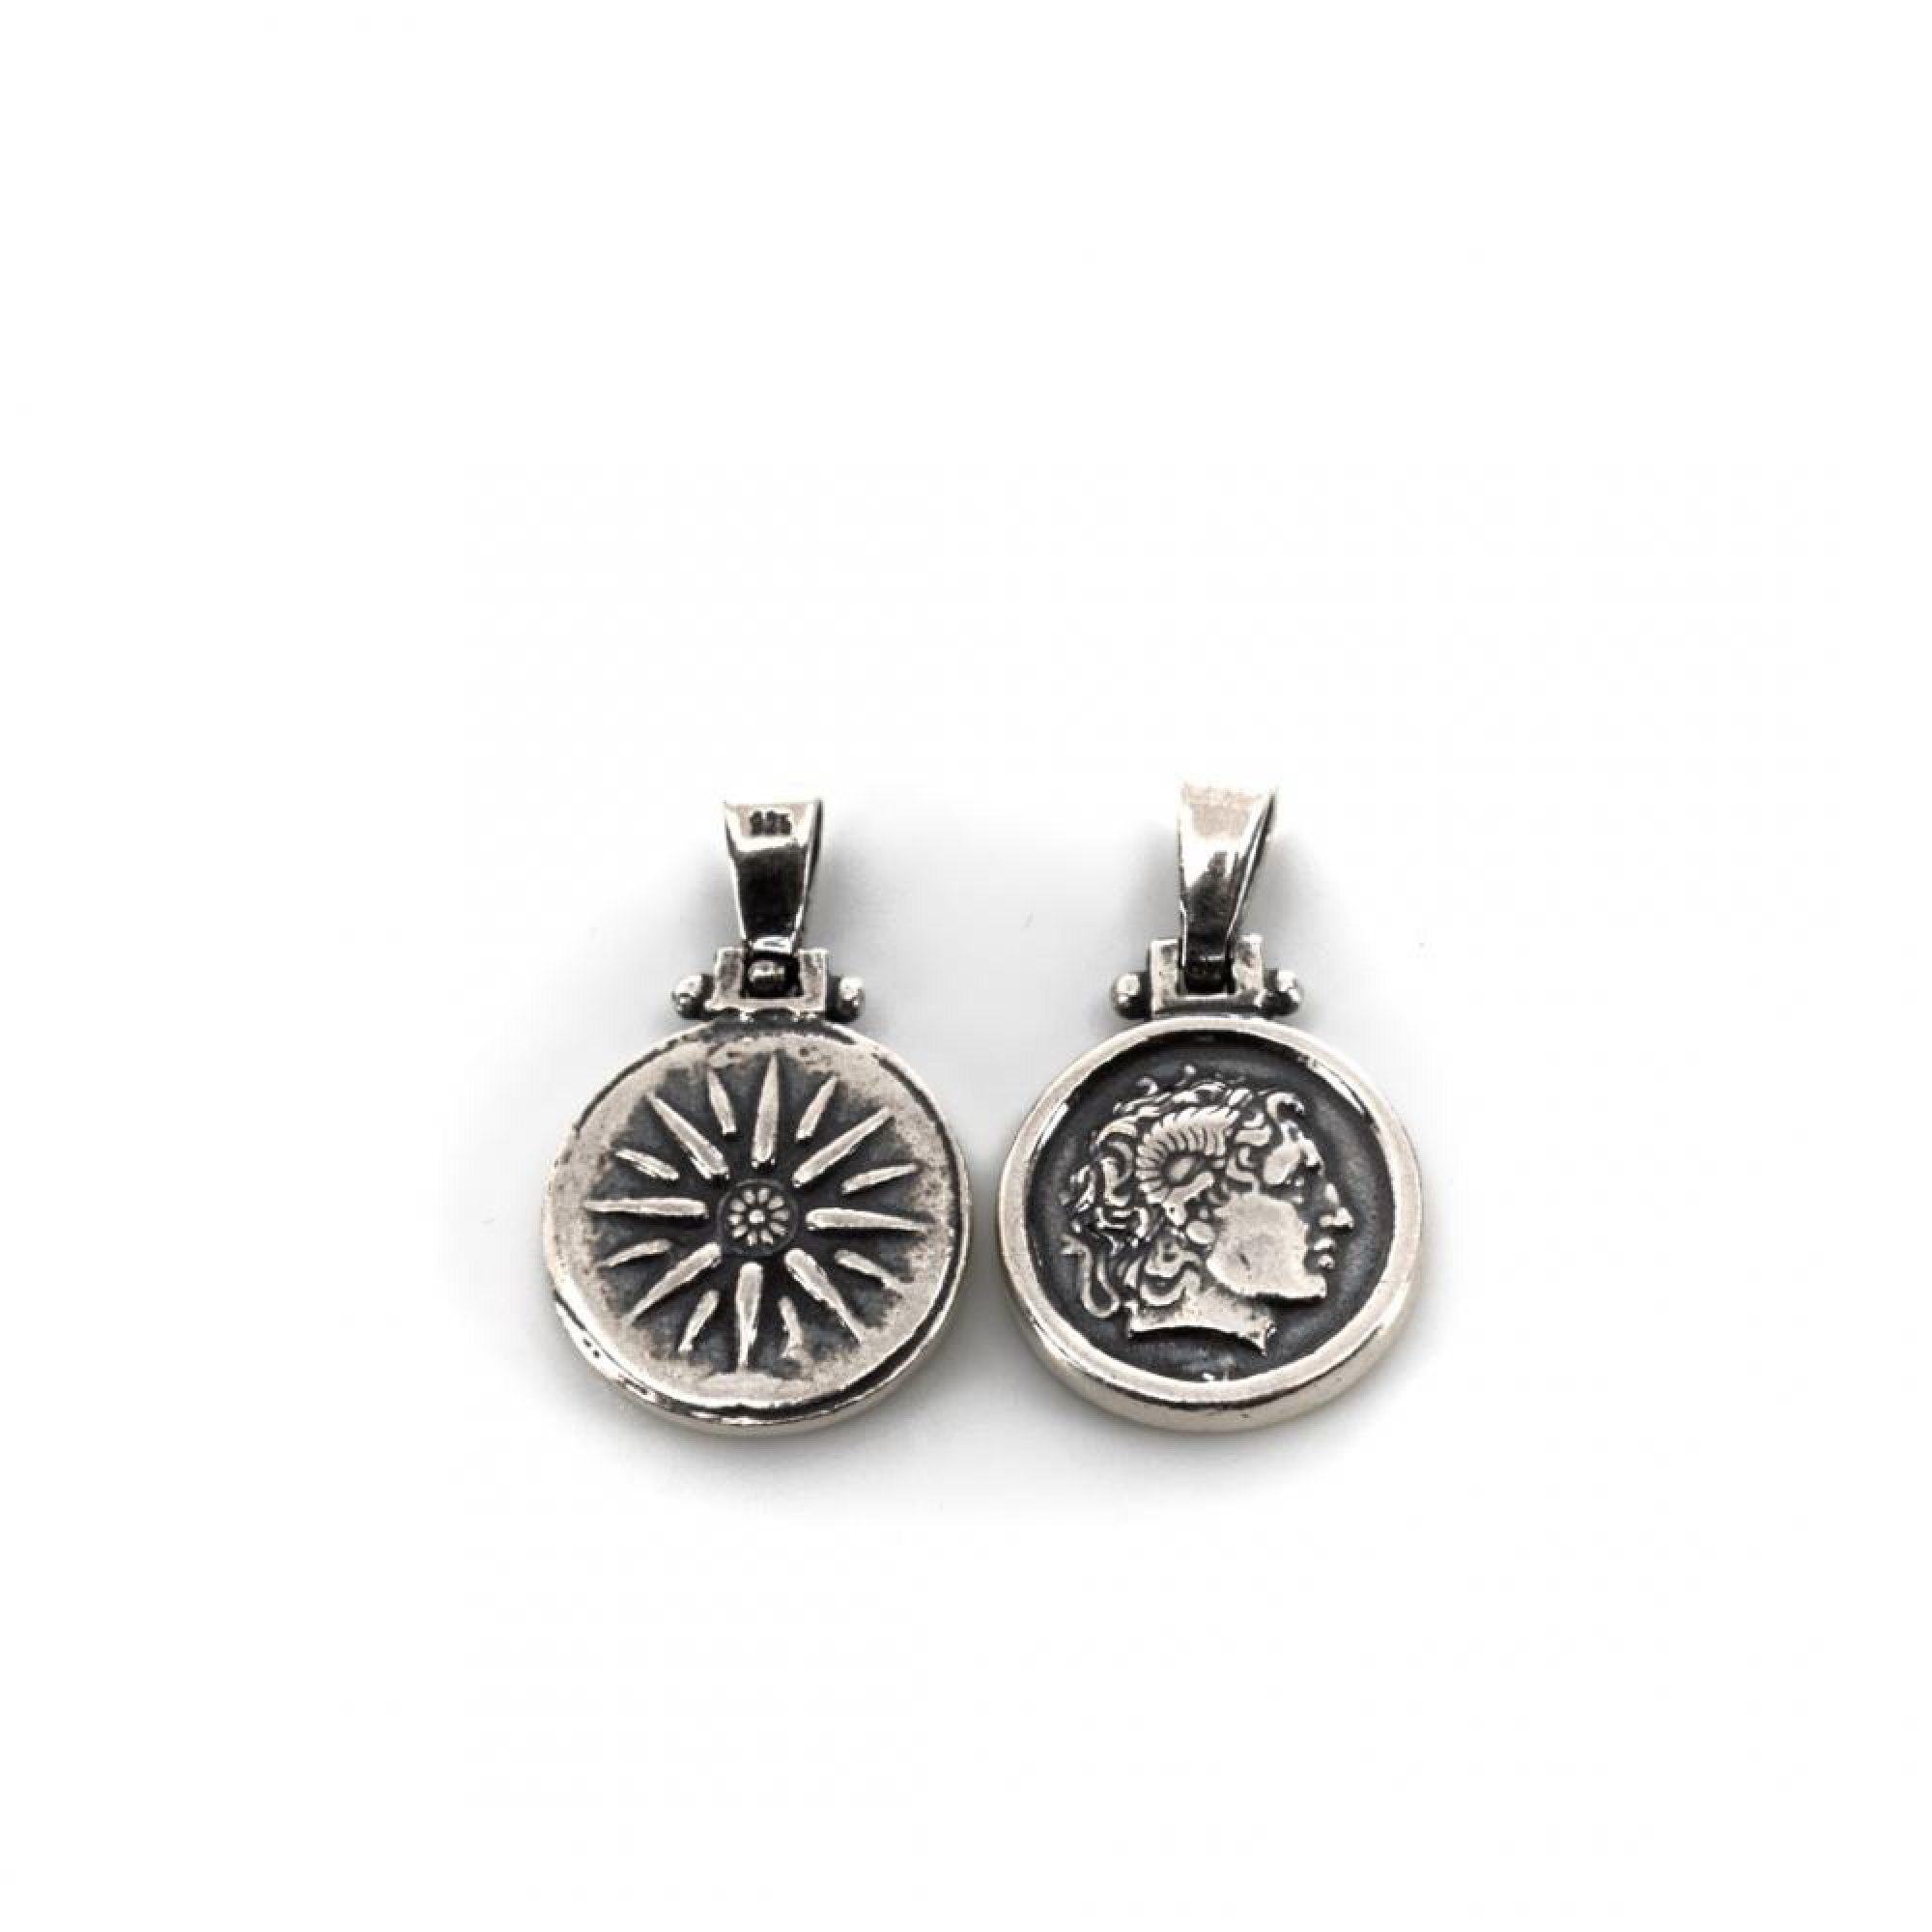 Double sided Vergina star - Alexander the Great  oxidised pendant